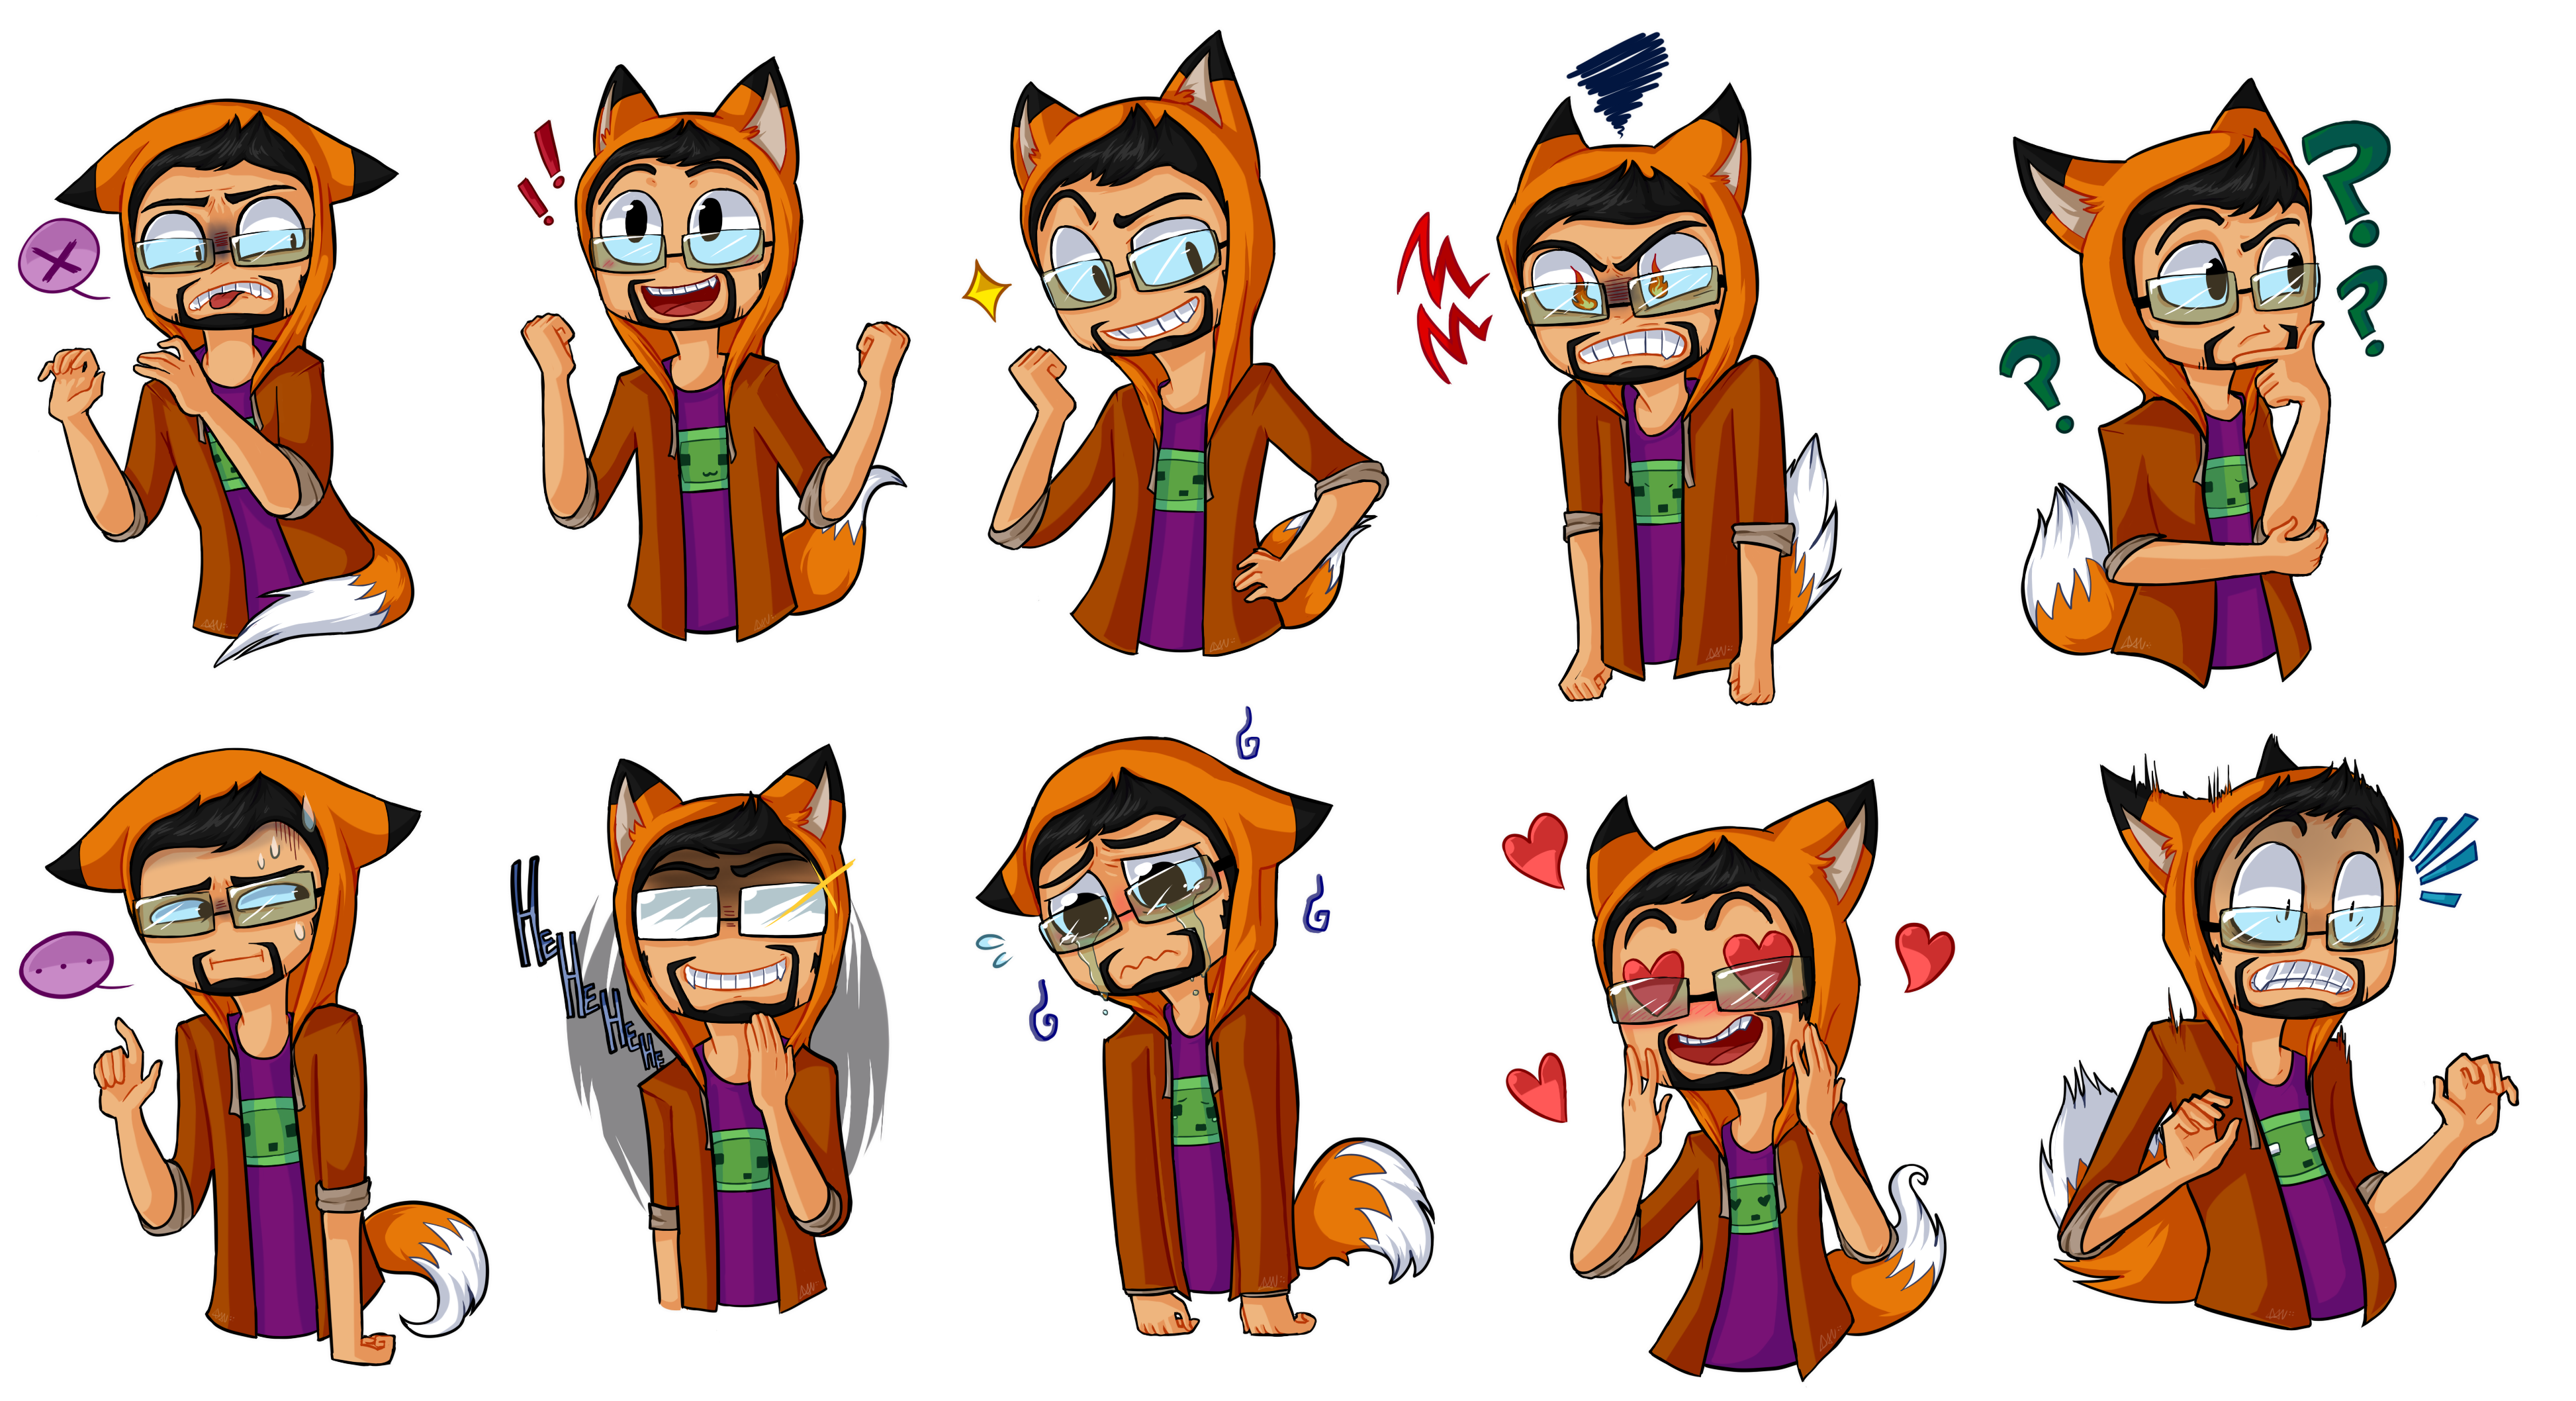 SlyFoxHound Expressions - SpeedPaint - YouTube